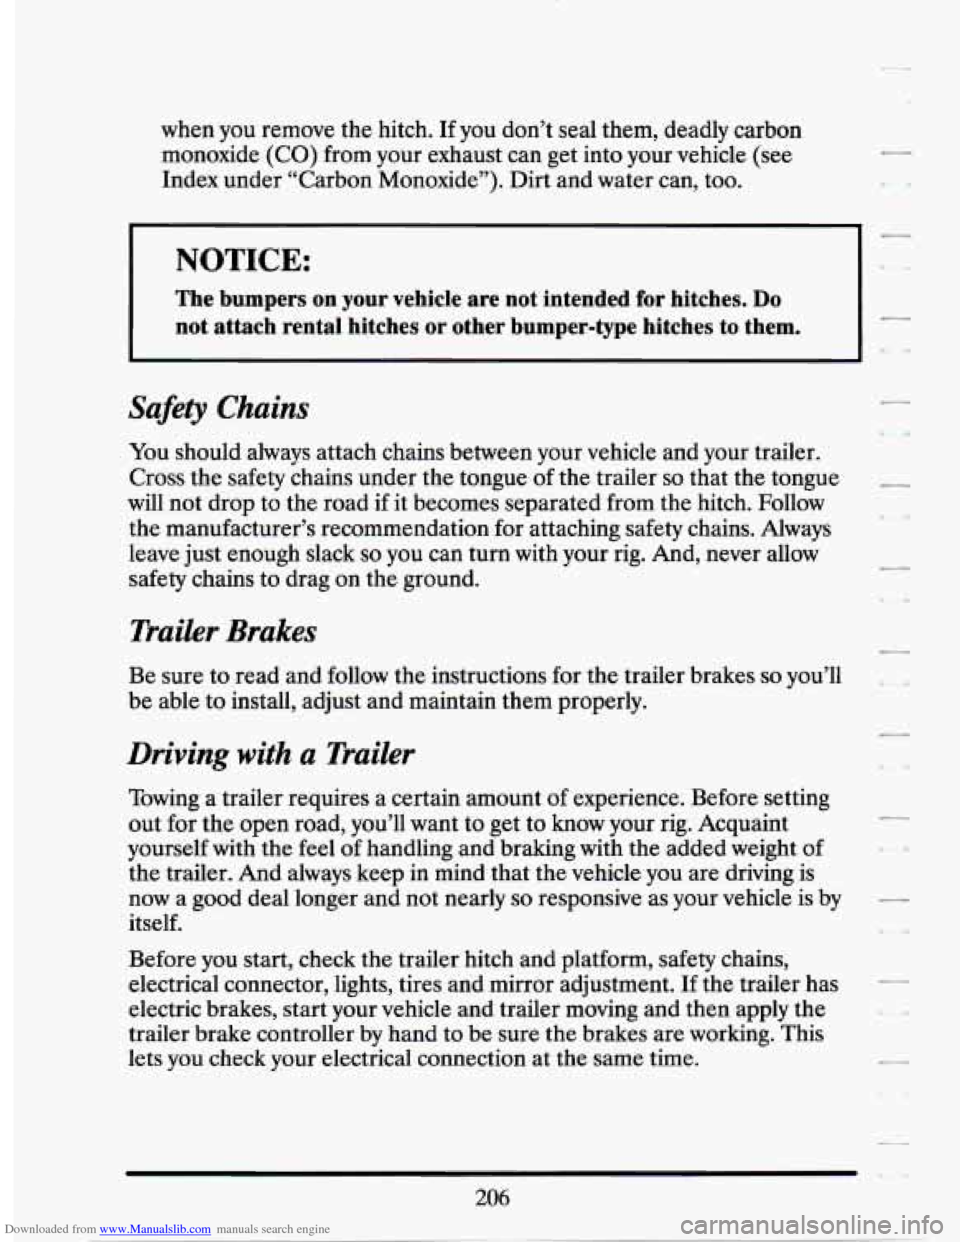 CADILLAC SEVILLE 1994 4.G Owners Manual Downloaded from www.Manualslib.com manuals search engine when  you  remove the hitch.  If  you  don’t  seal them,  deadly  carbon 
monoxide  (CO) from your  exhaust  can  get  into your  vehicle  (s